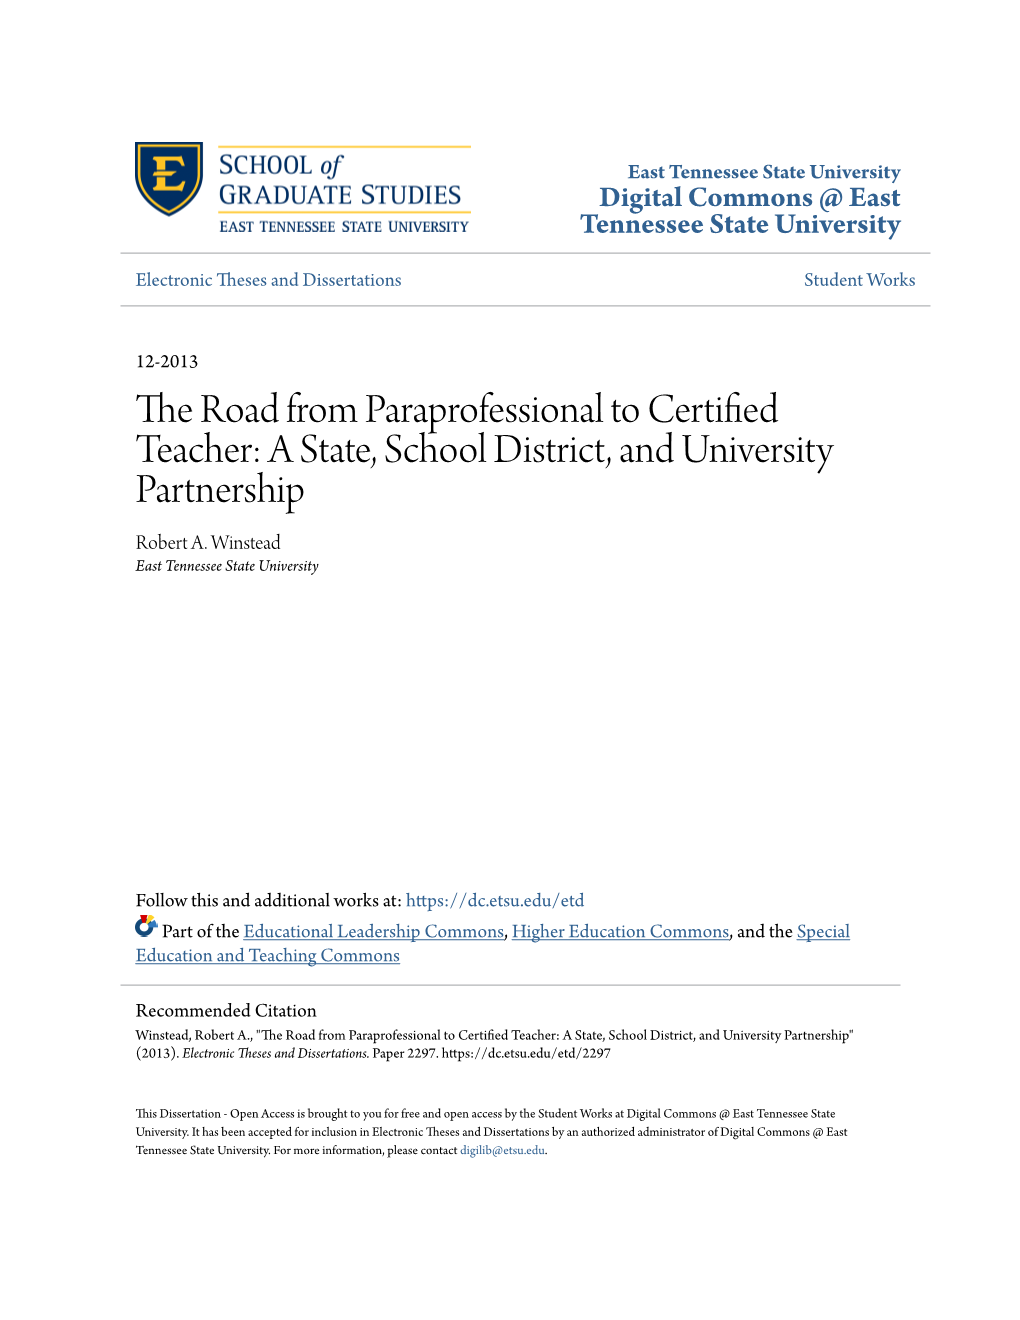 The Road from Paraprofessional to Certified Teacher: a State, School District, and University Partnership Robert A